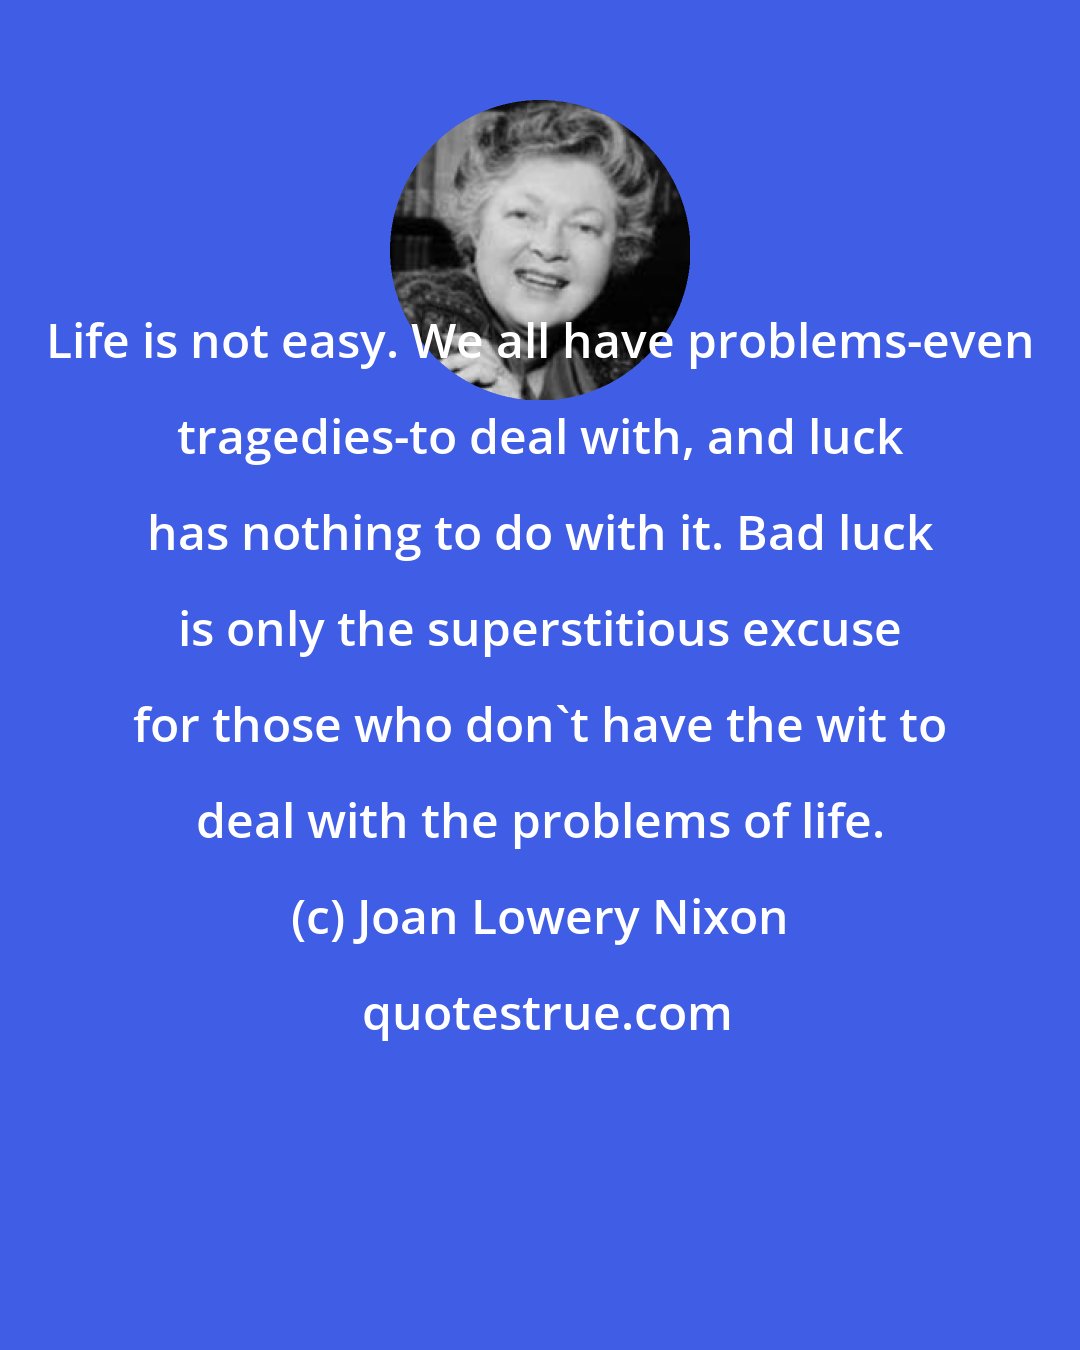 Joan Lowery Nixon: Life is not easy. We all have problems-even tragedies-to deal with, and luck has nothing to do with it. Bad luck is only the superstitious excuse for those who don't have the wit to deal with the problems of life.